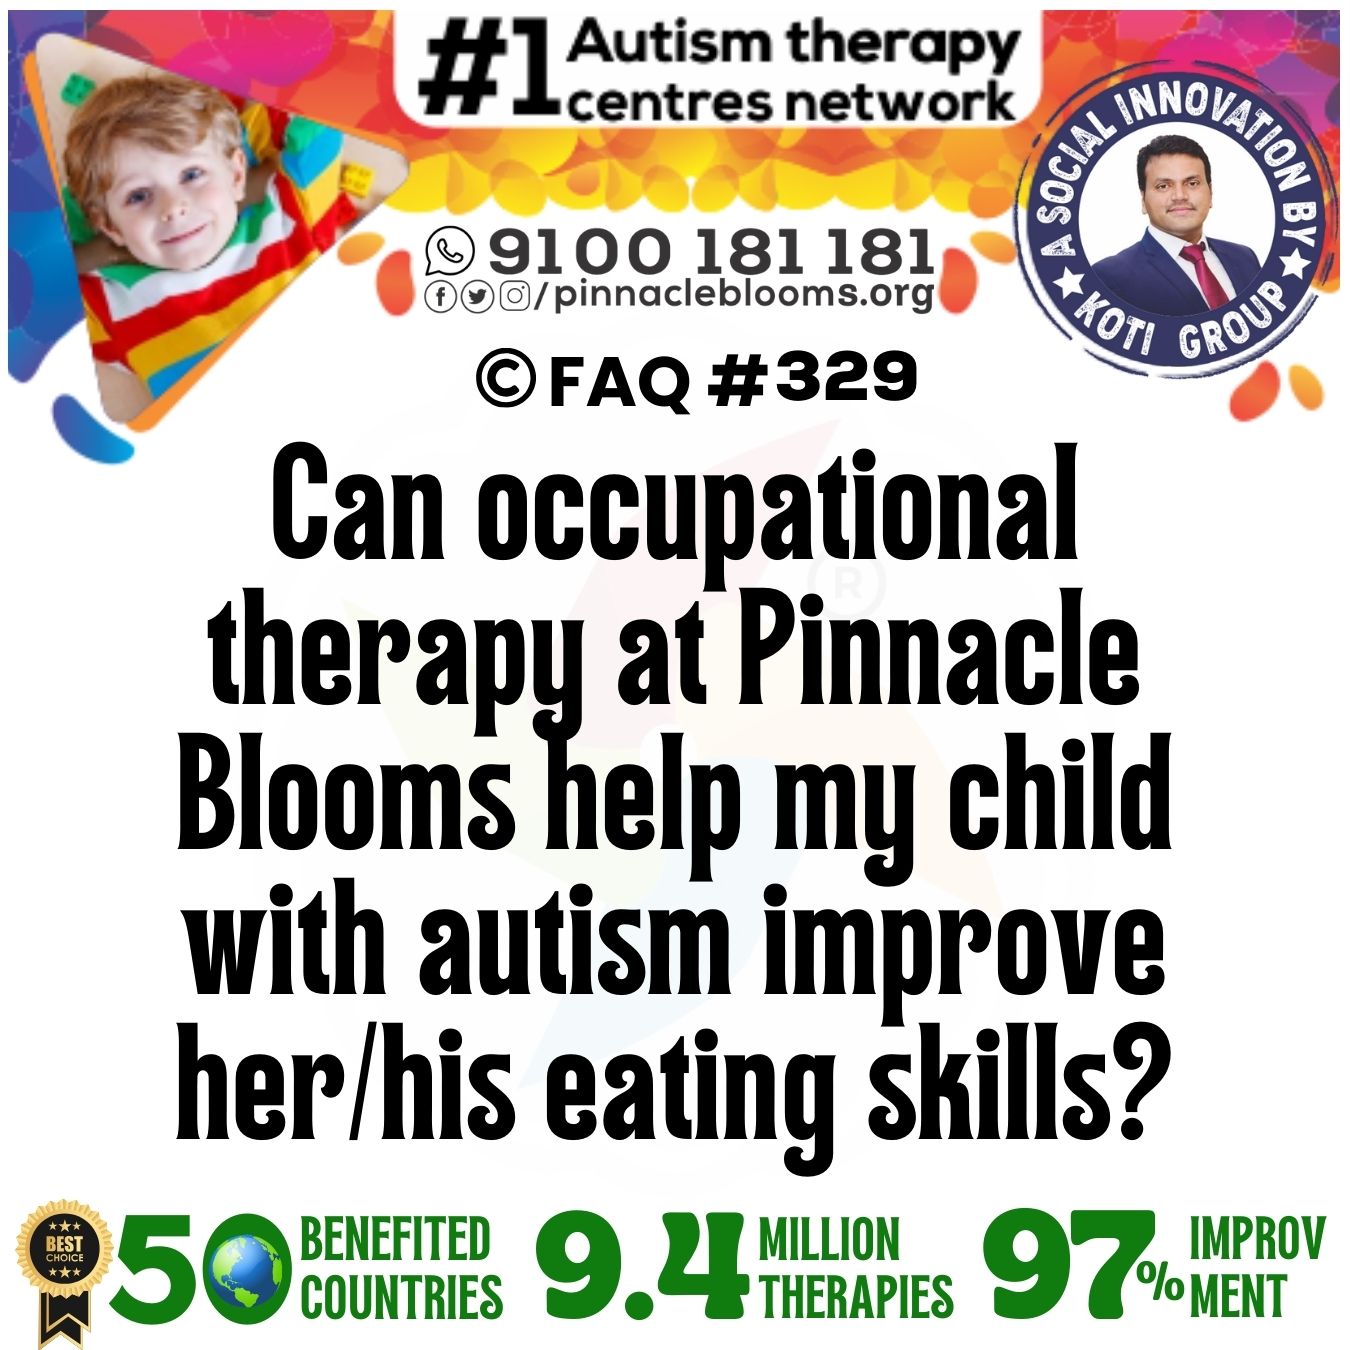 Can occupational therapy at Pinnacle Blooms help my child with autism improve her/his eating skills?